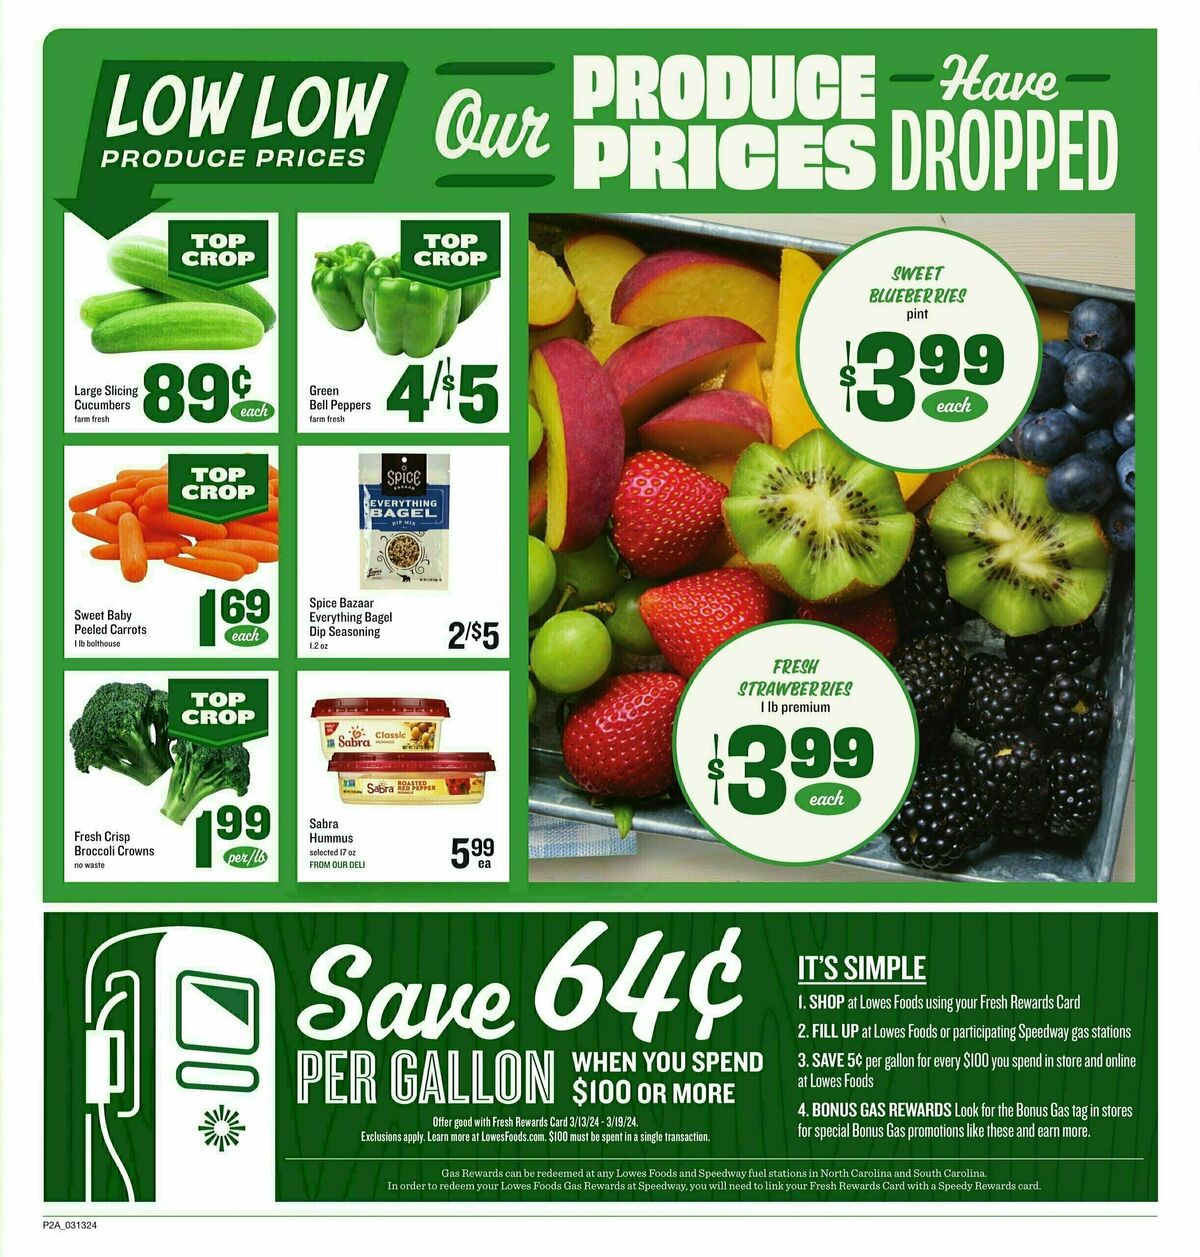 Lowes Foods Weekly Ad from March 13